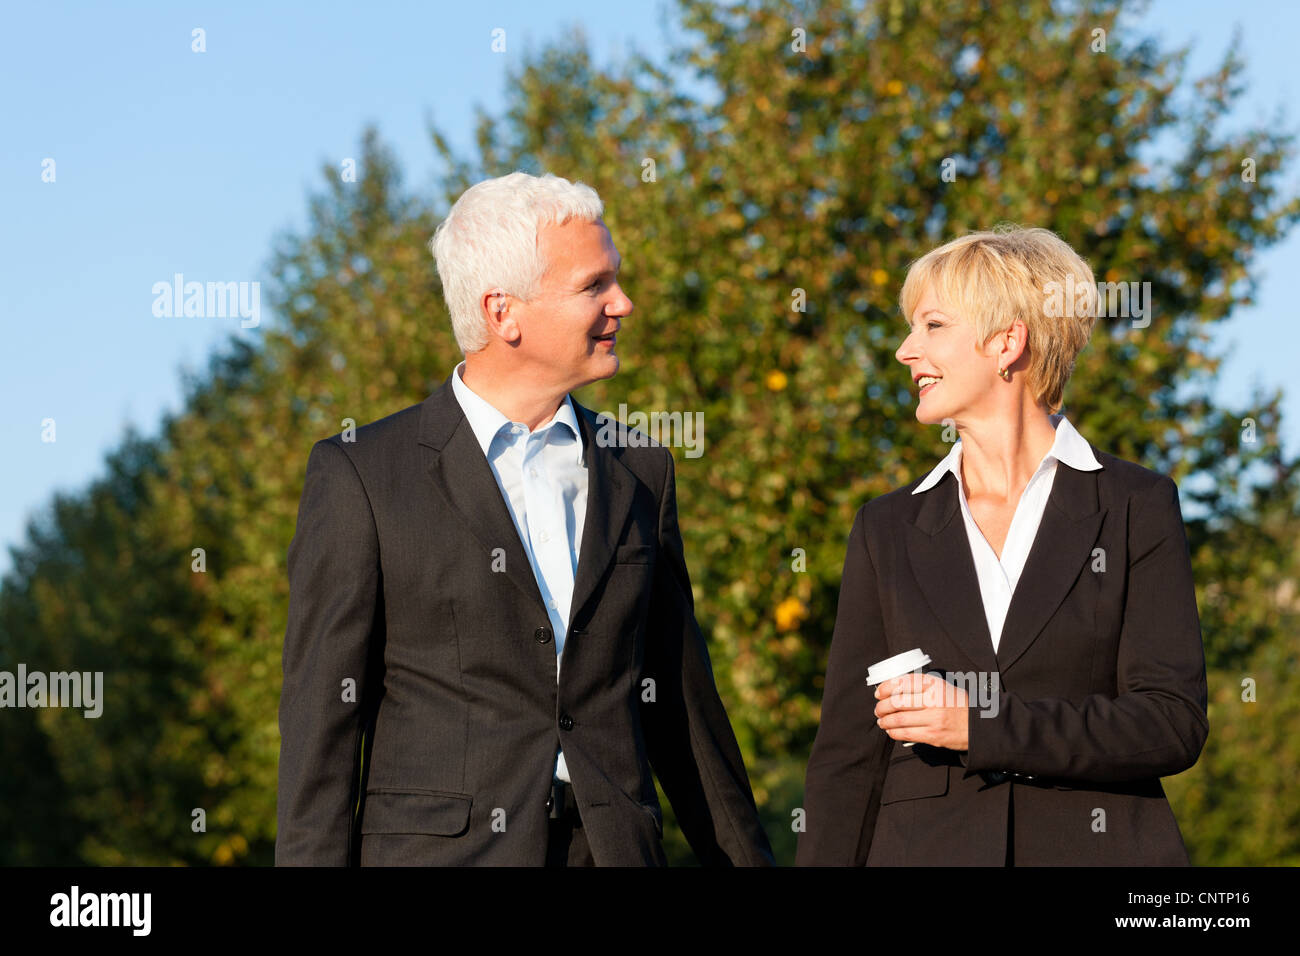 Business people - mature or senior - talking outdoors and walking in a park Stock Photo